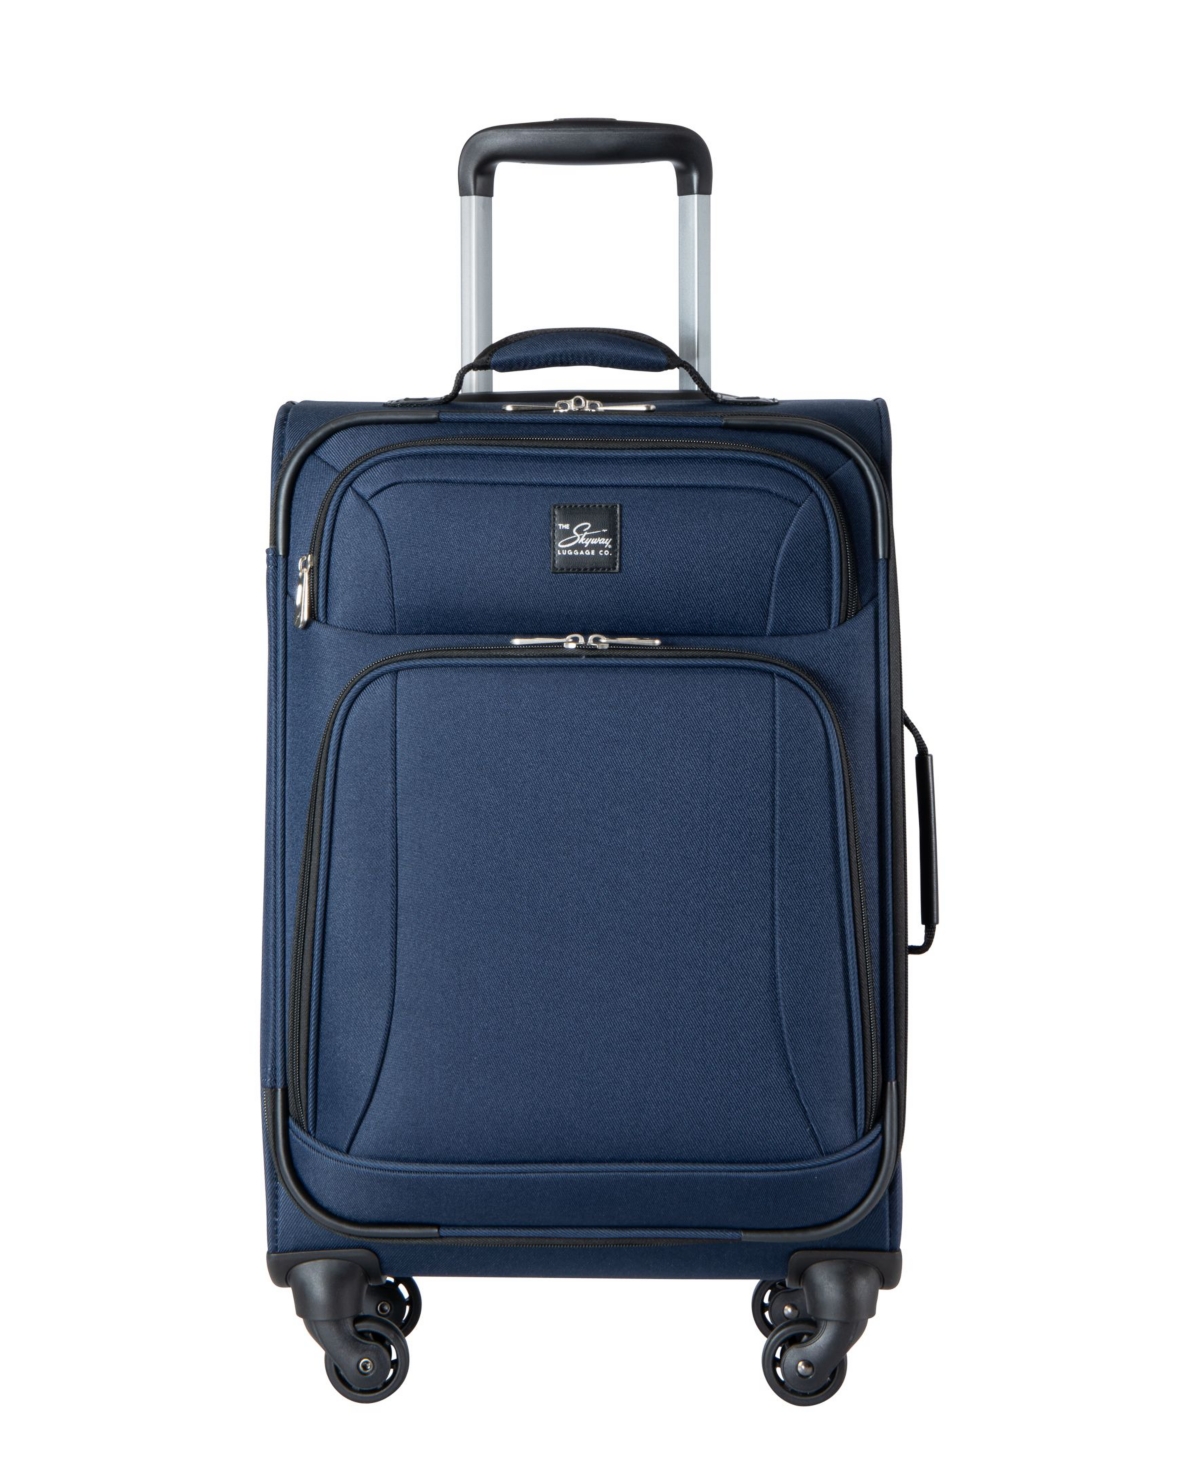 Epic 20" Carry-On Spinner Suitcase - Surf Blue